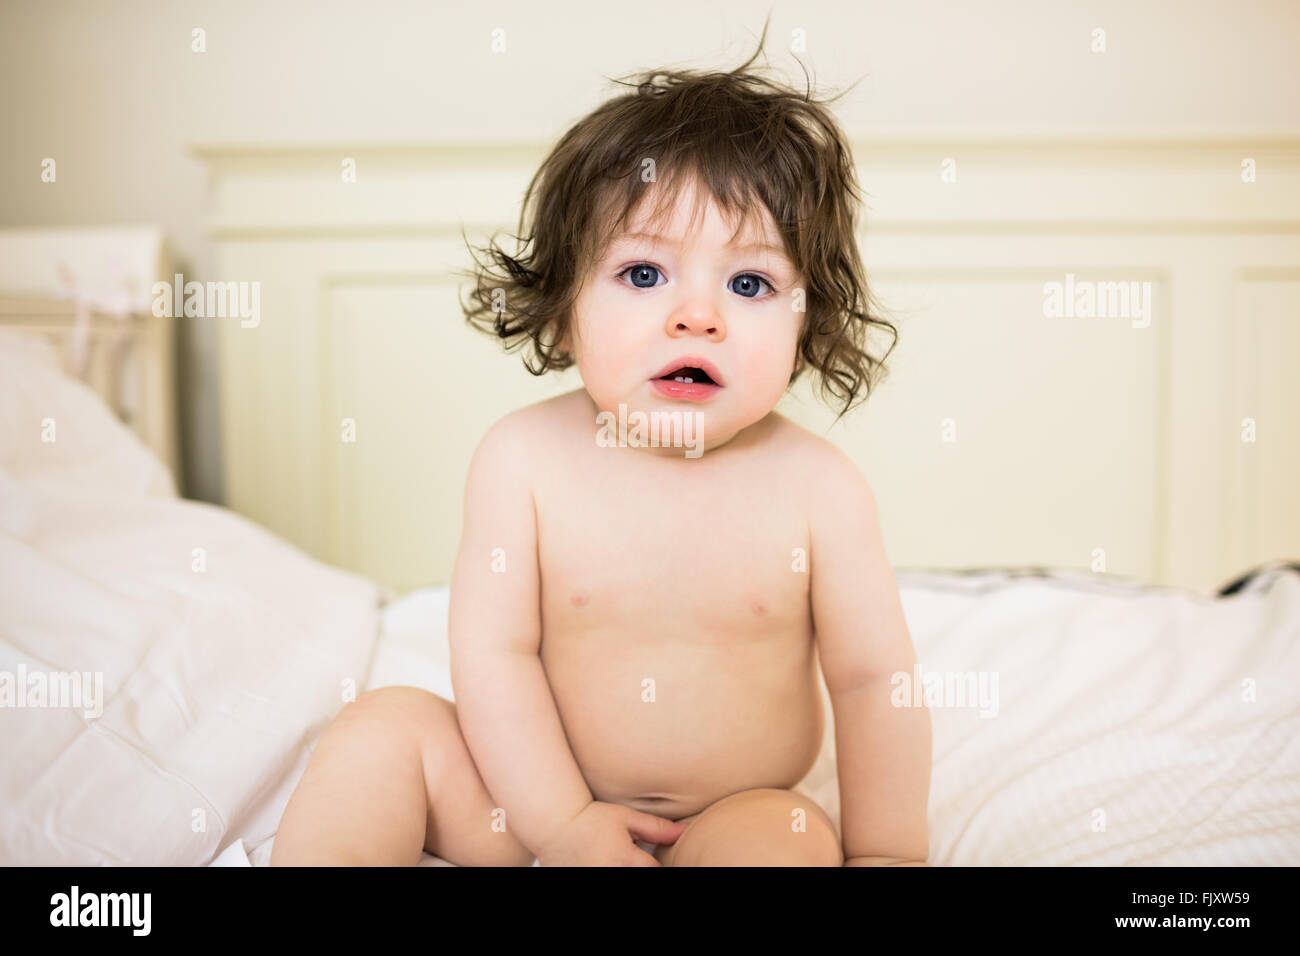 Cute baby sitting on a bed Stock Photo